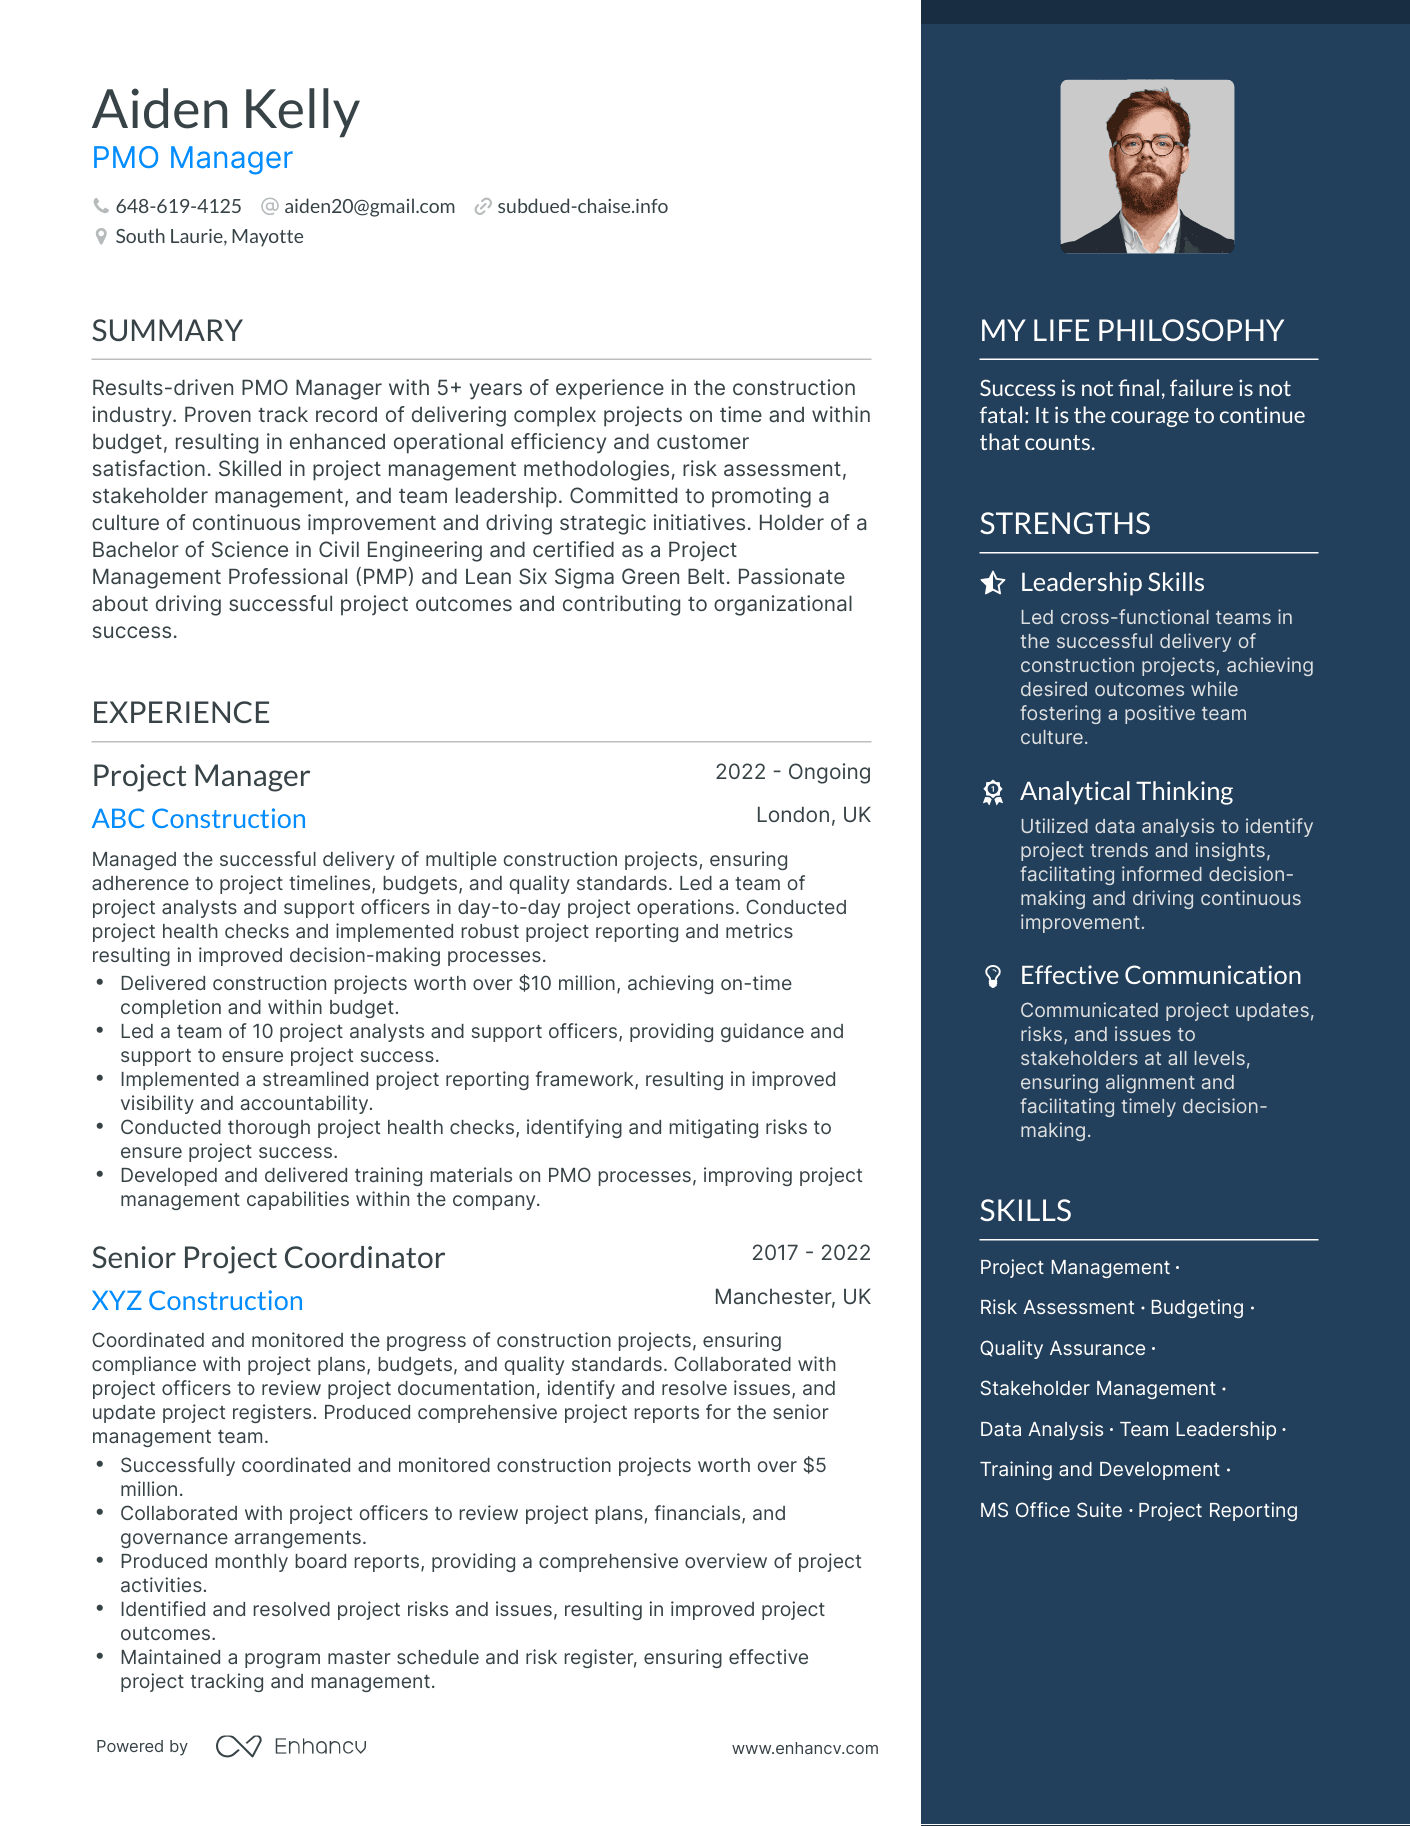 PMO Manager resume example